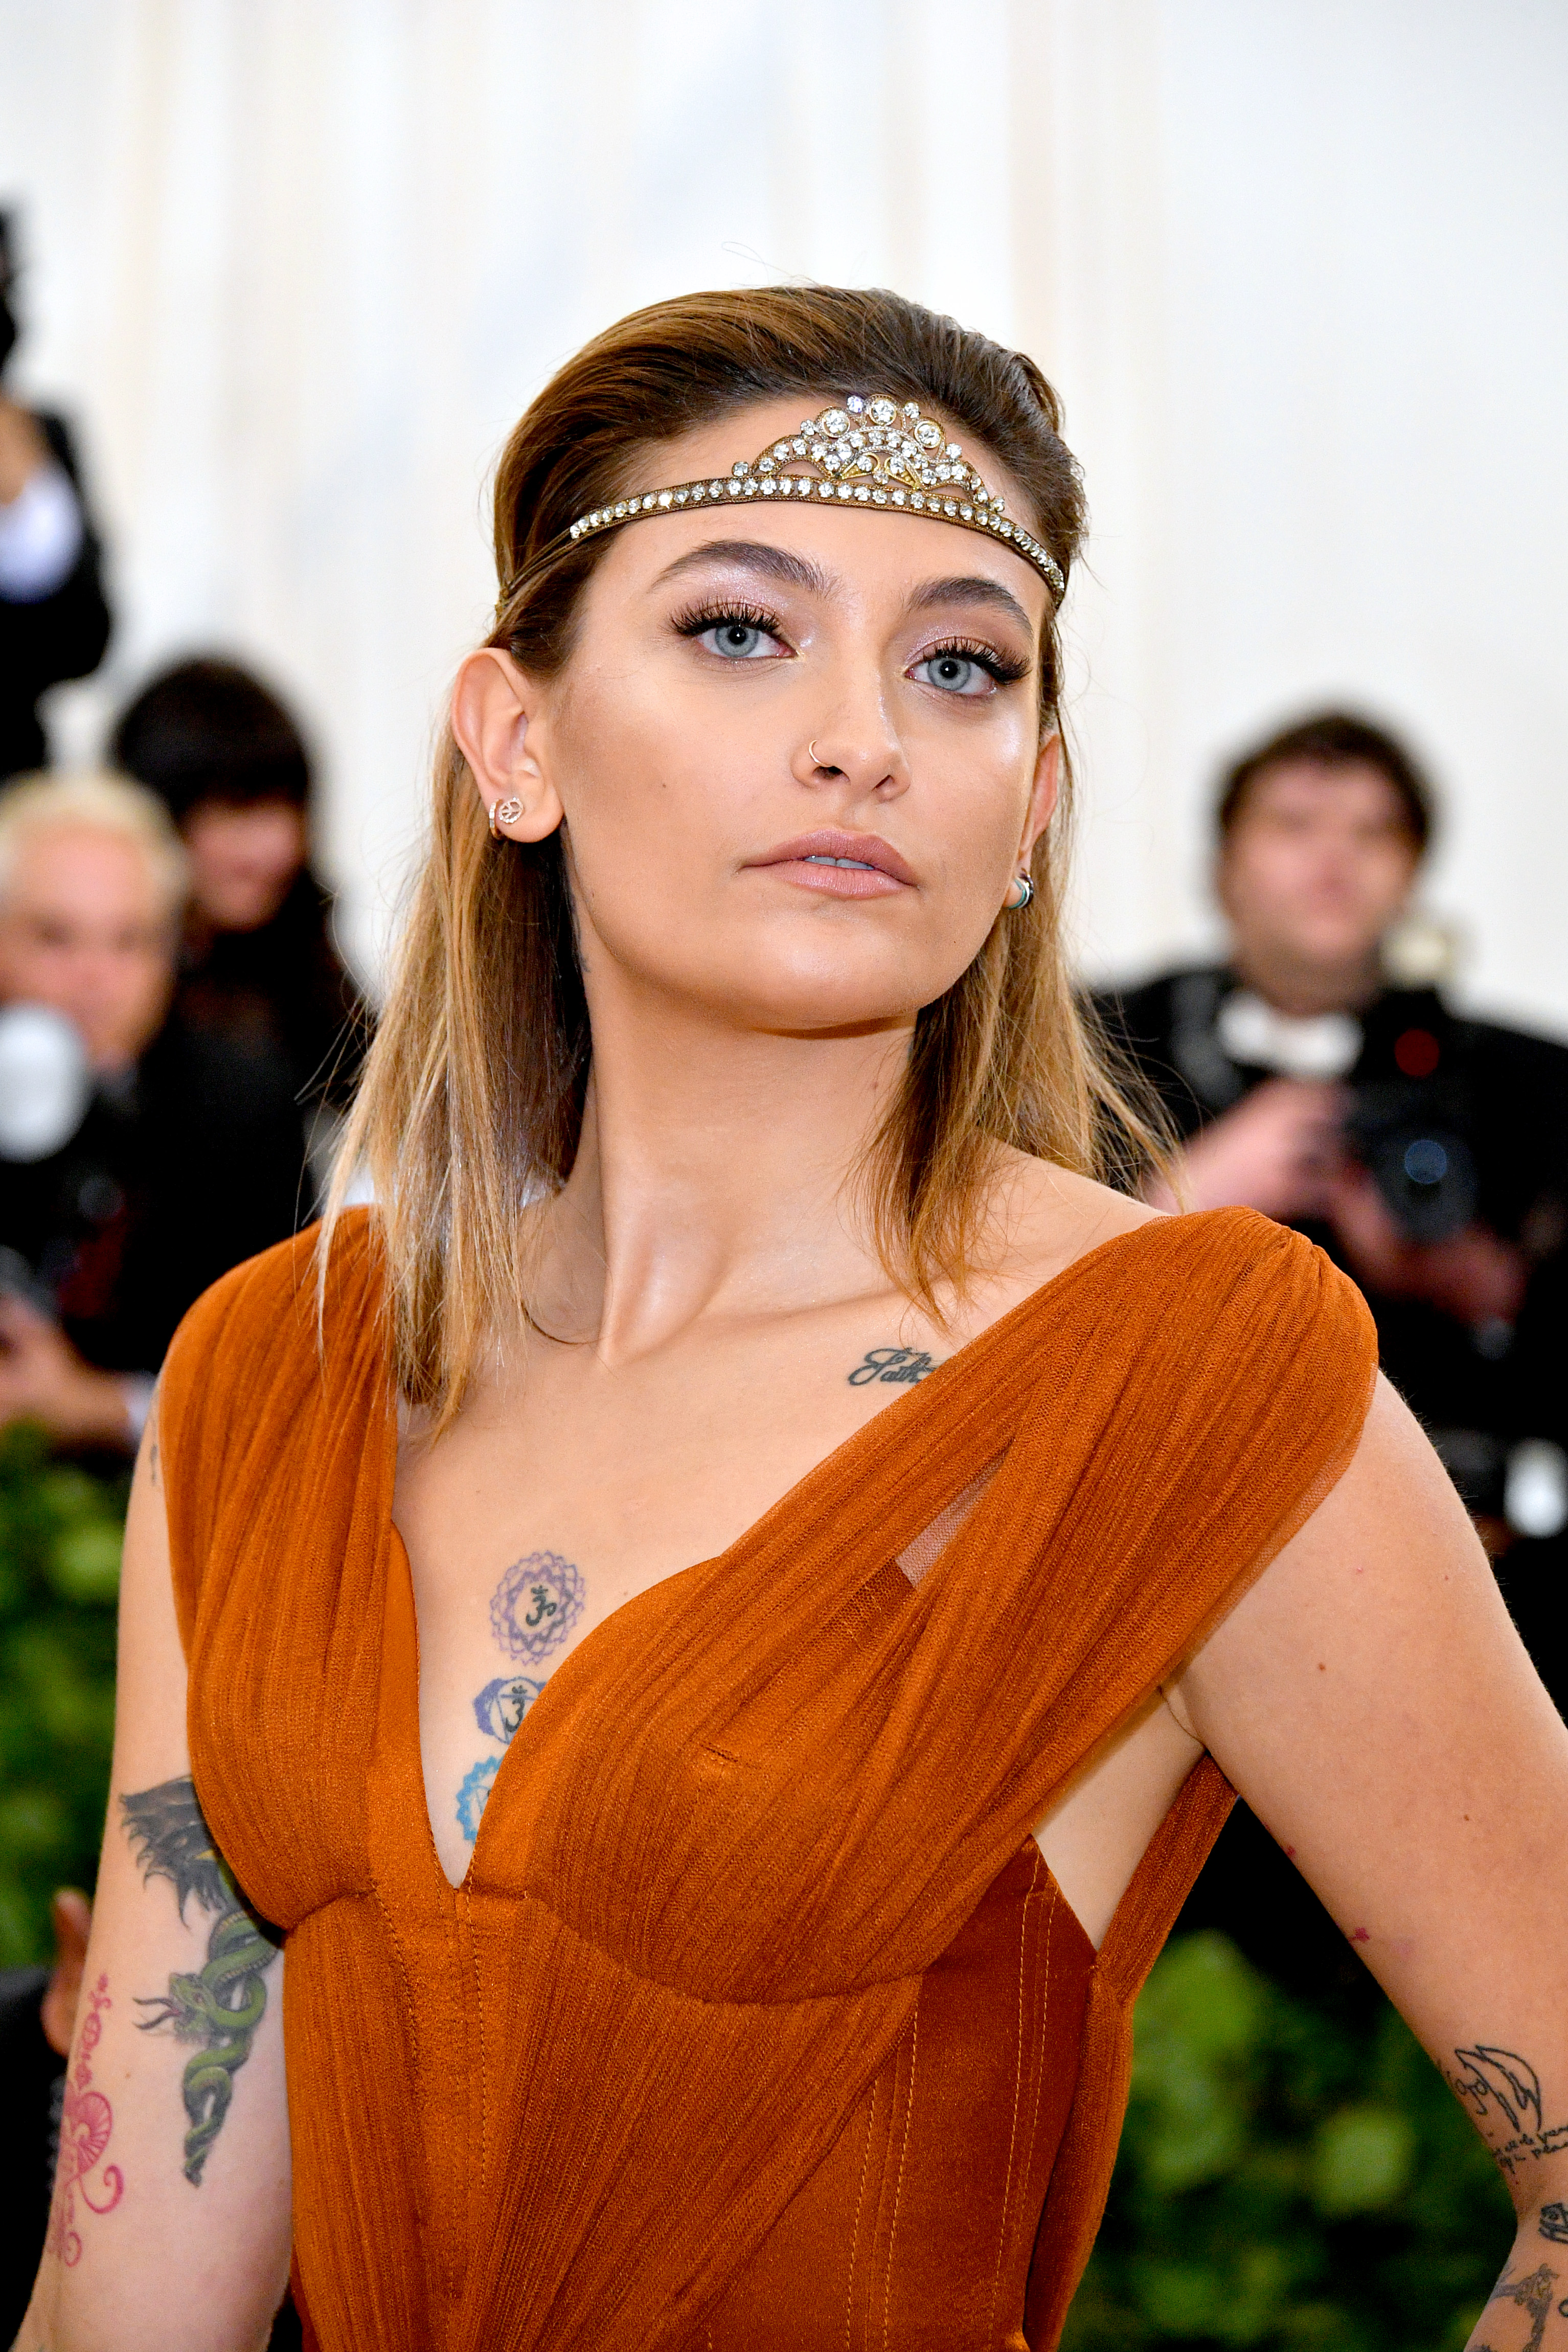 Paris Jackson attends the Heavenly Bodies: Fashion & The Catholic Imagination Costume Institute Gala in New York City on May 7, 2018 | Source: Getty Images